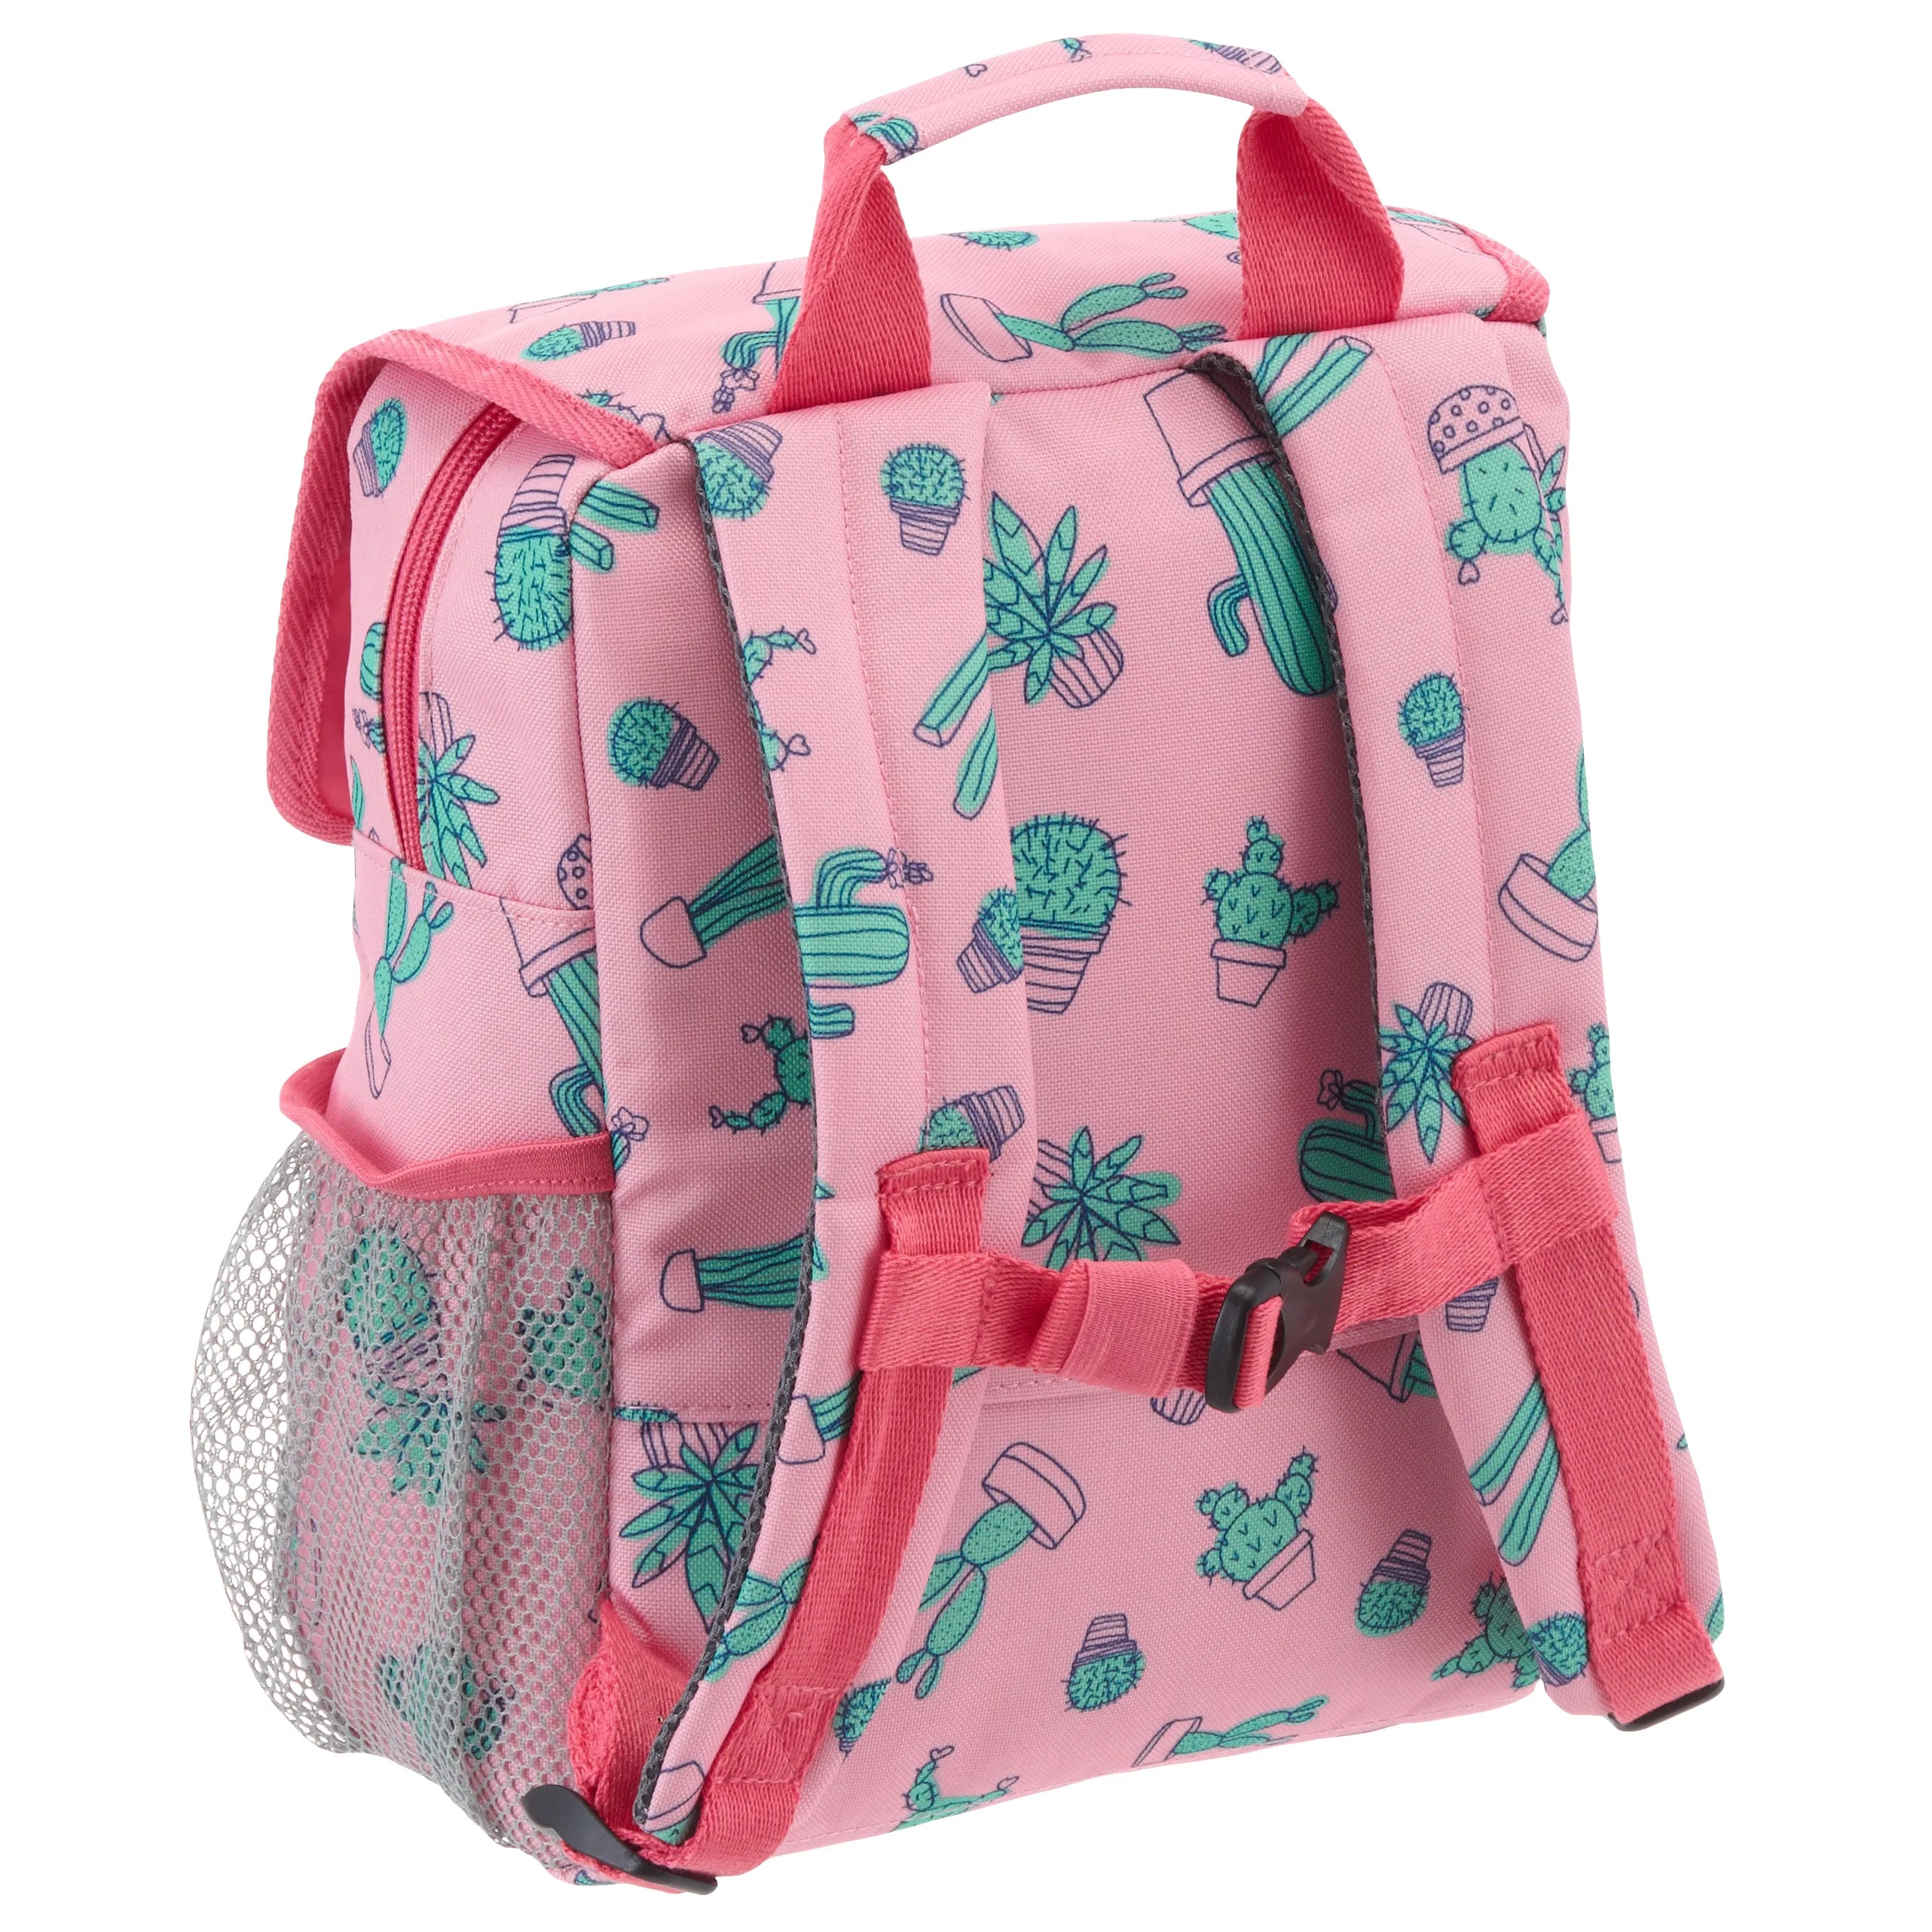 Reisenthel Kids Backpack Rucksack 28 cm - cats and dogs mint